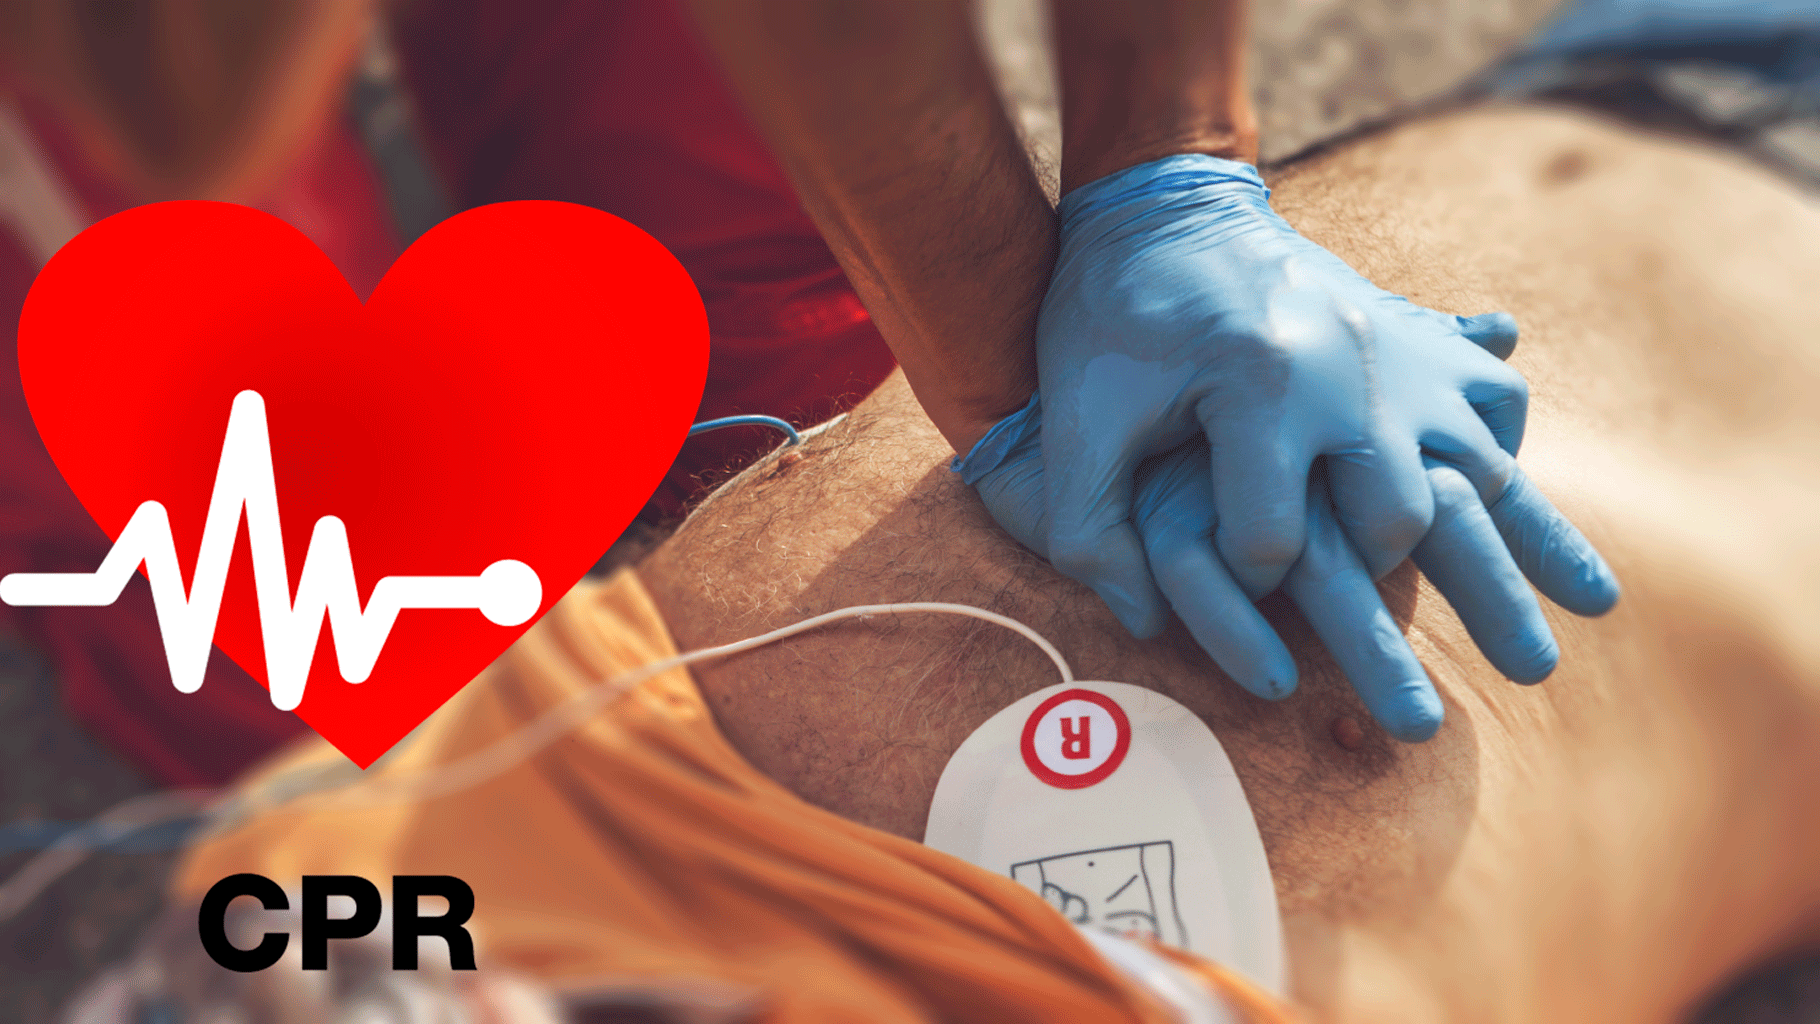 

Starting rescue efforts for victims of cardiac arrest before ambulance arrives boosts their chances of survival (Photo: iStock altered by The Quint) 